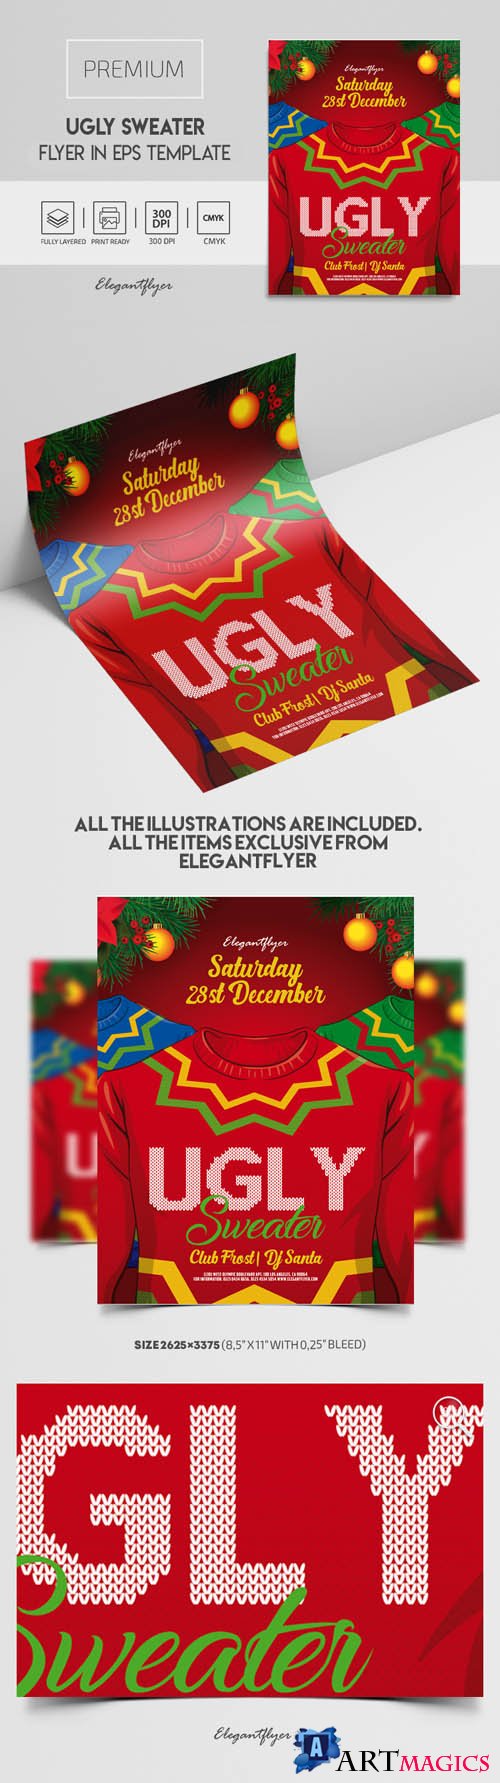 Ugly Sweater Premium Vector Flyer EPS Template